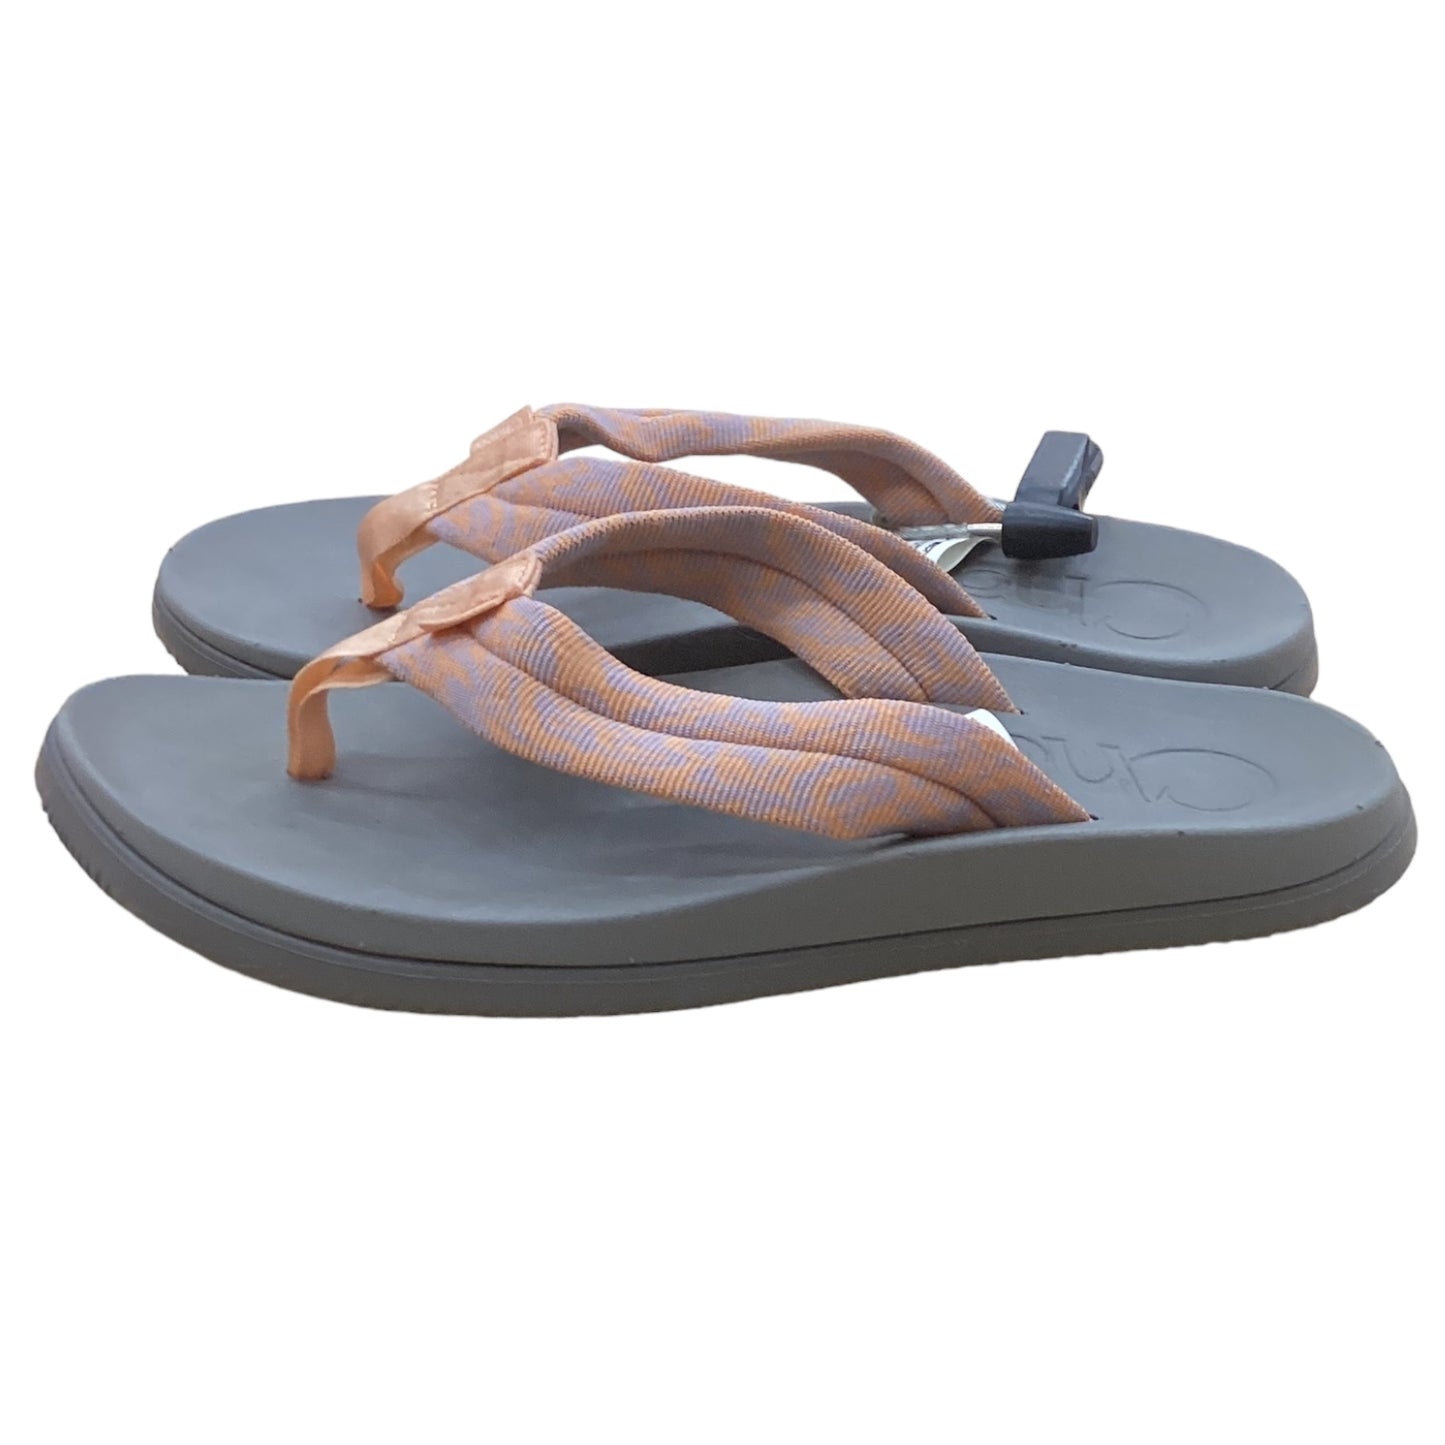 Sandals Flip Flops By Chacos  Size: 8